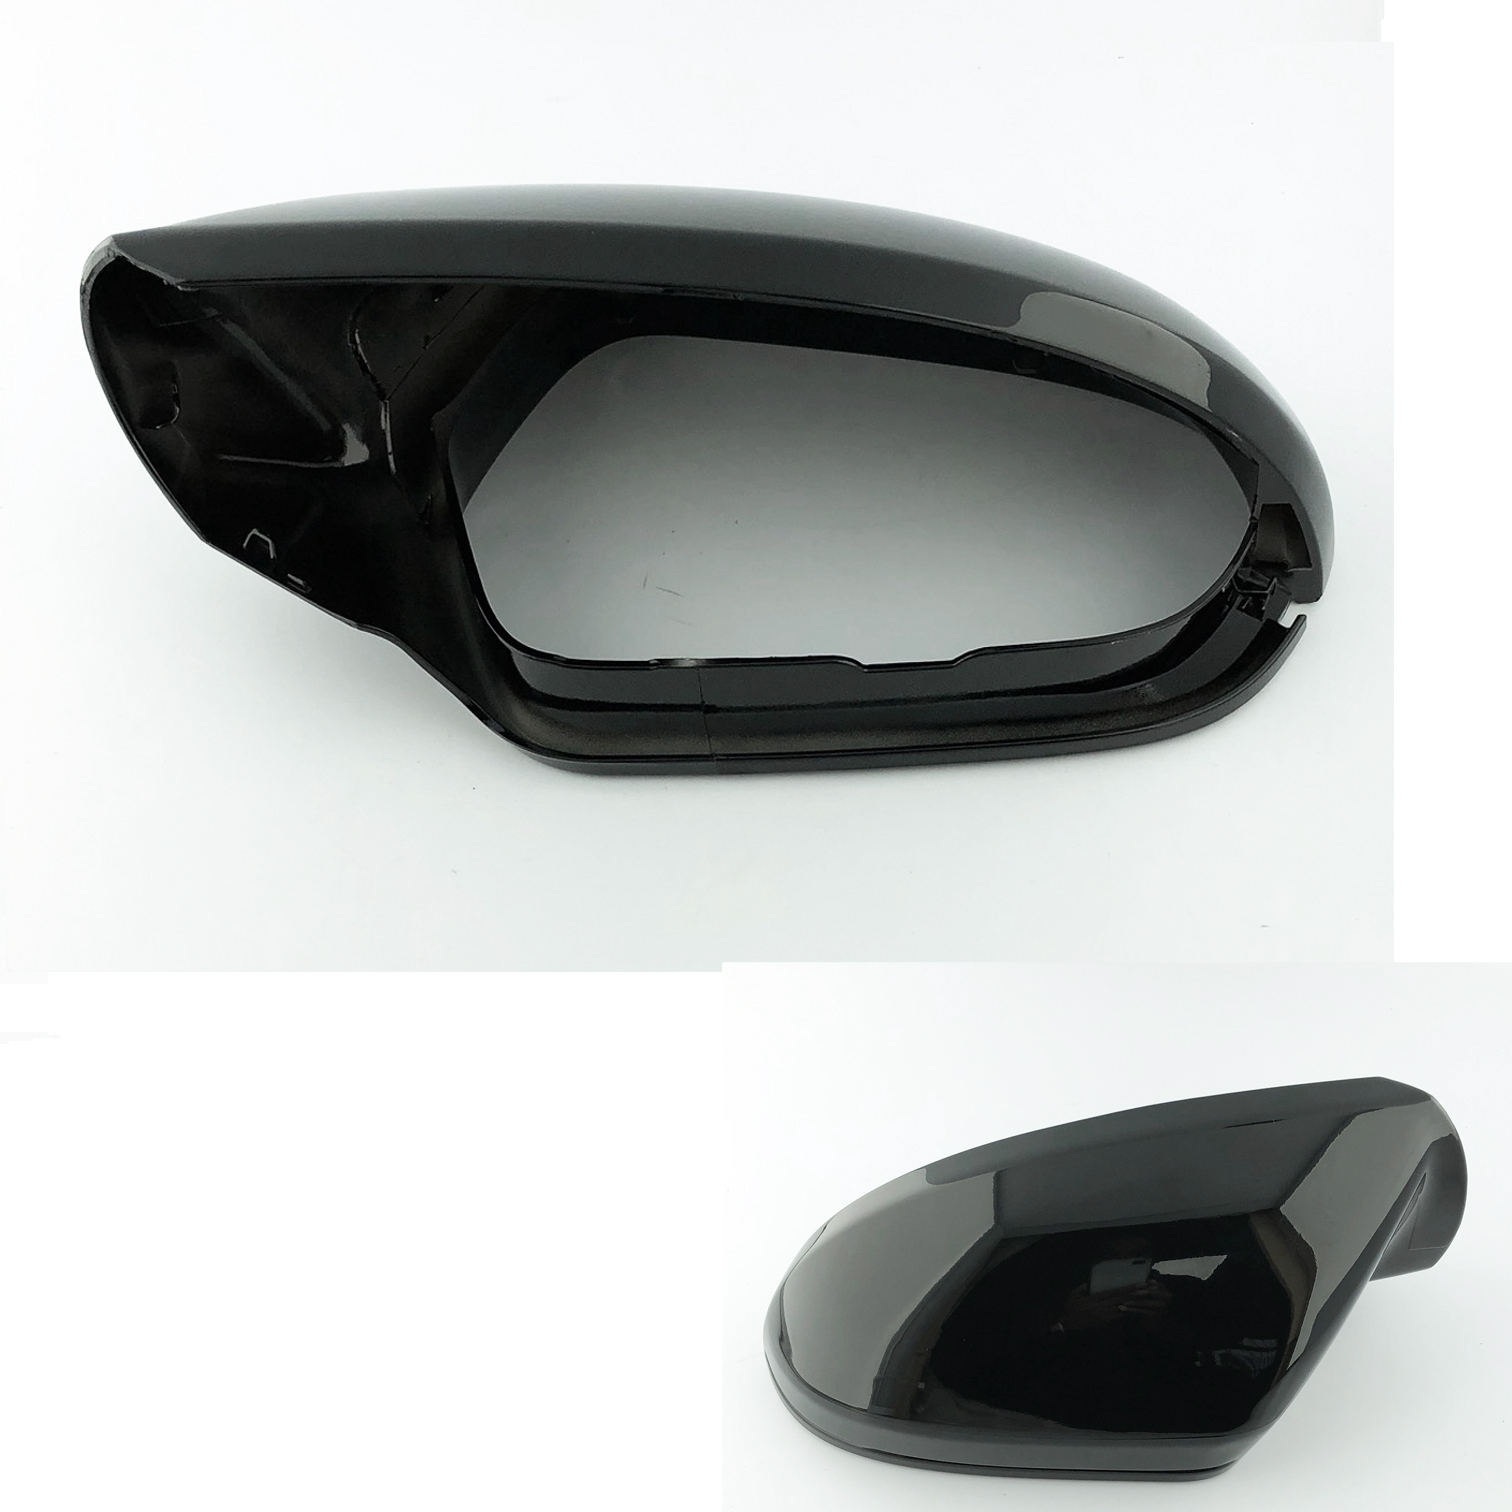 Low Price and High Quality Guarantee on audi a6 Driver Side Passenger Side Wing Mirror Replacements